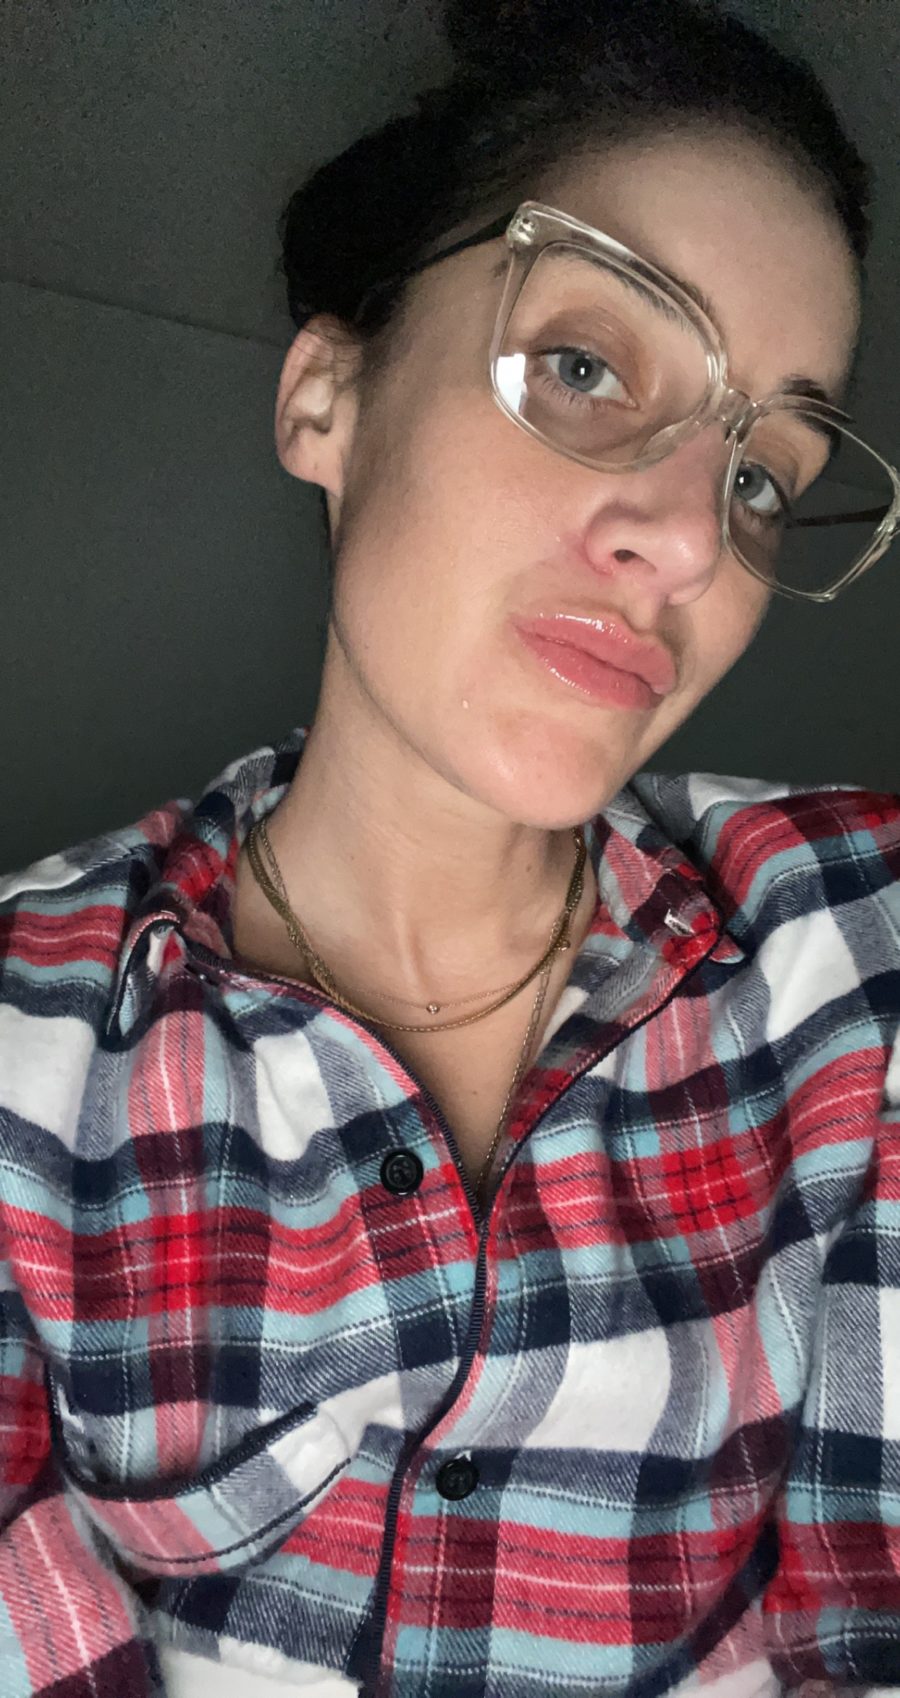 woman in pjs and glasses with Perioral Dermatitis